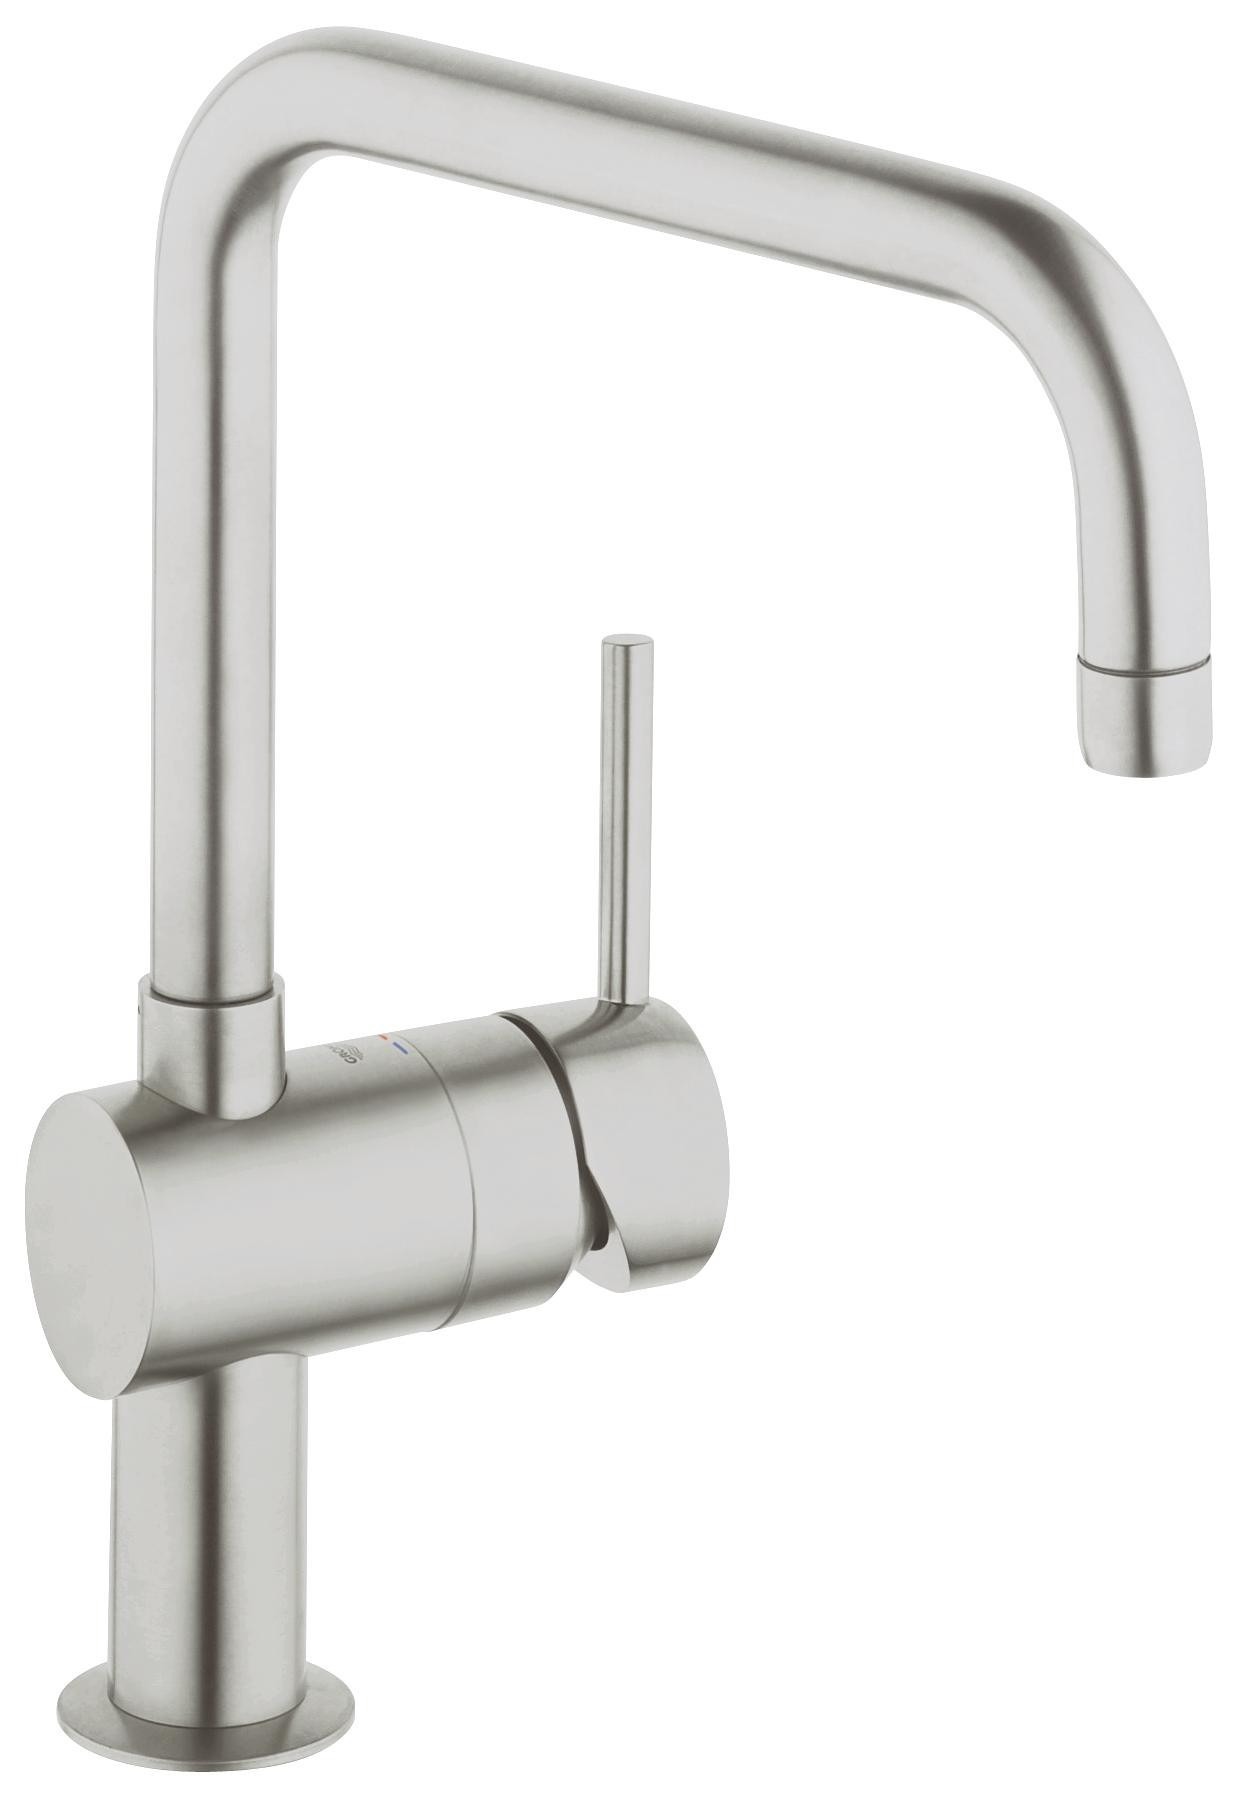 grifo grohe